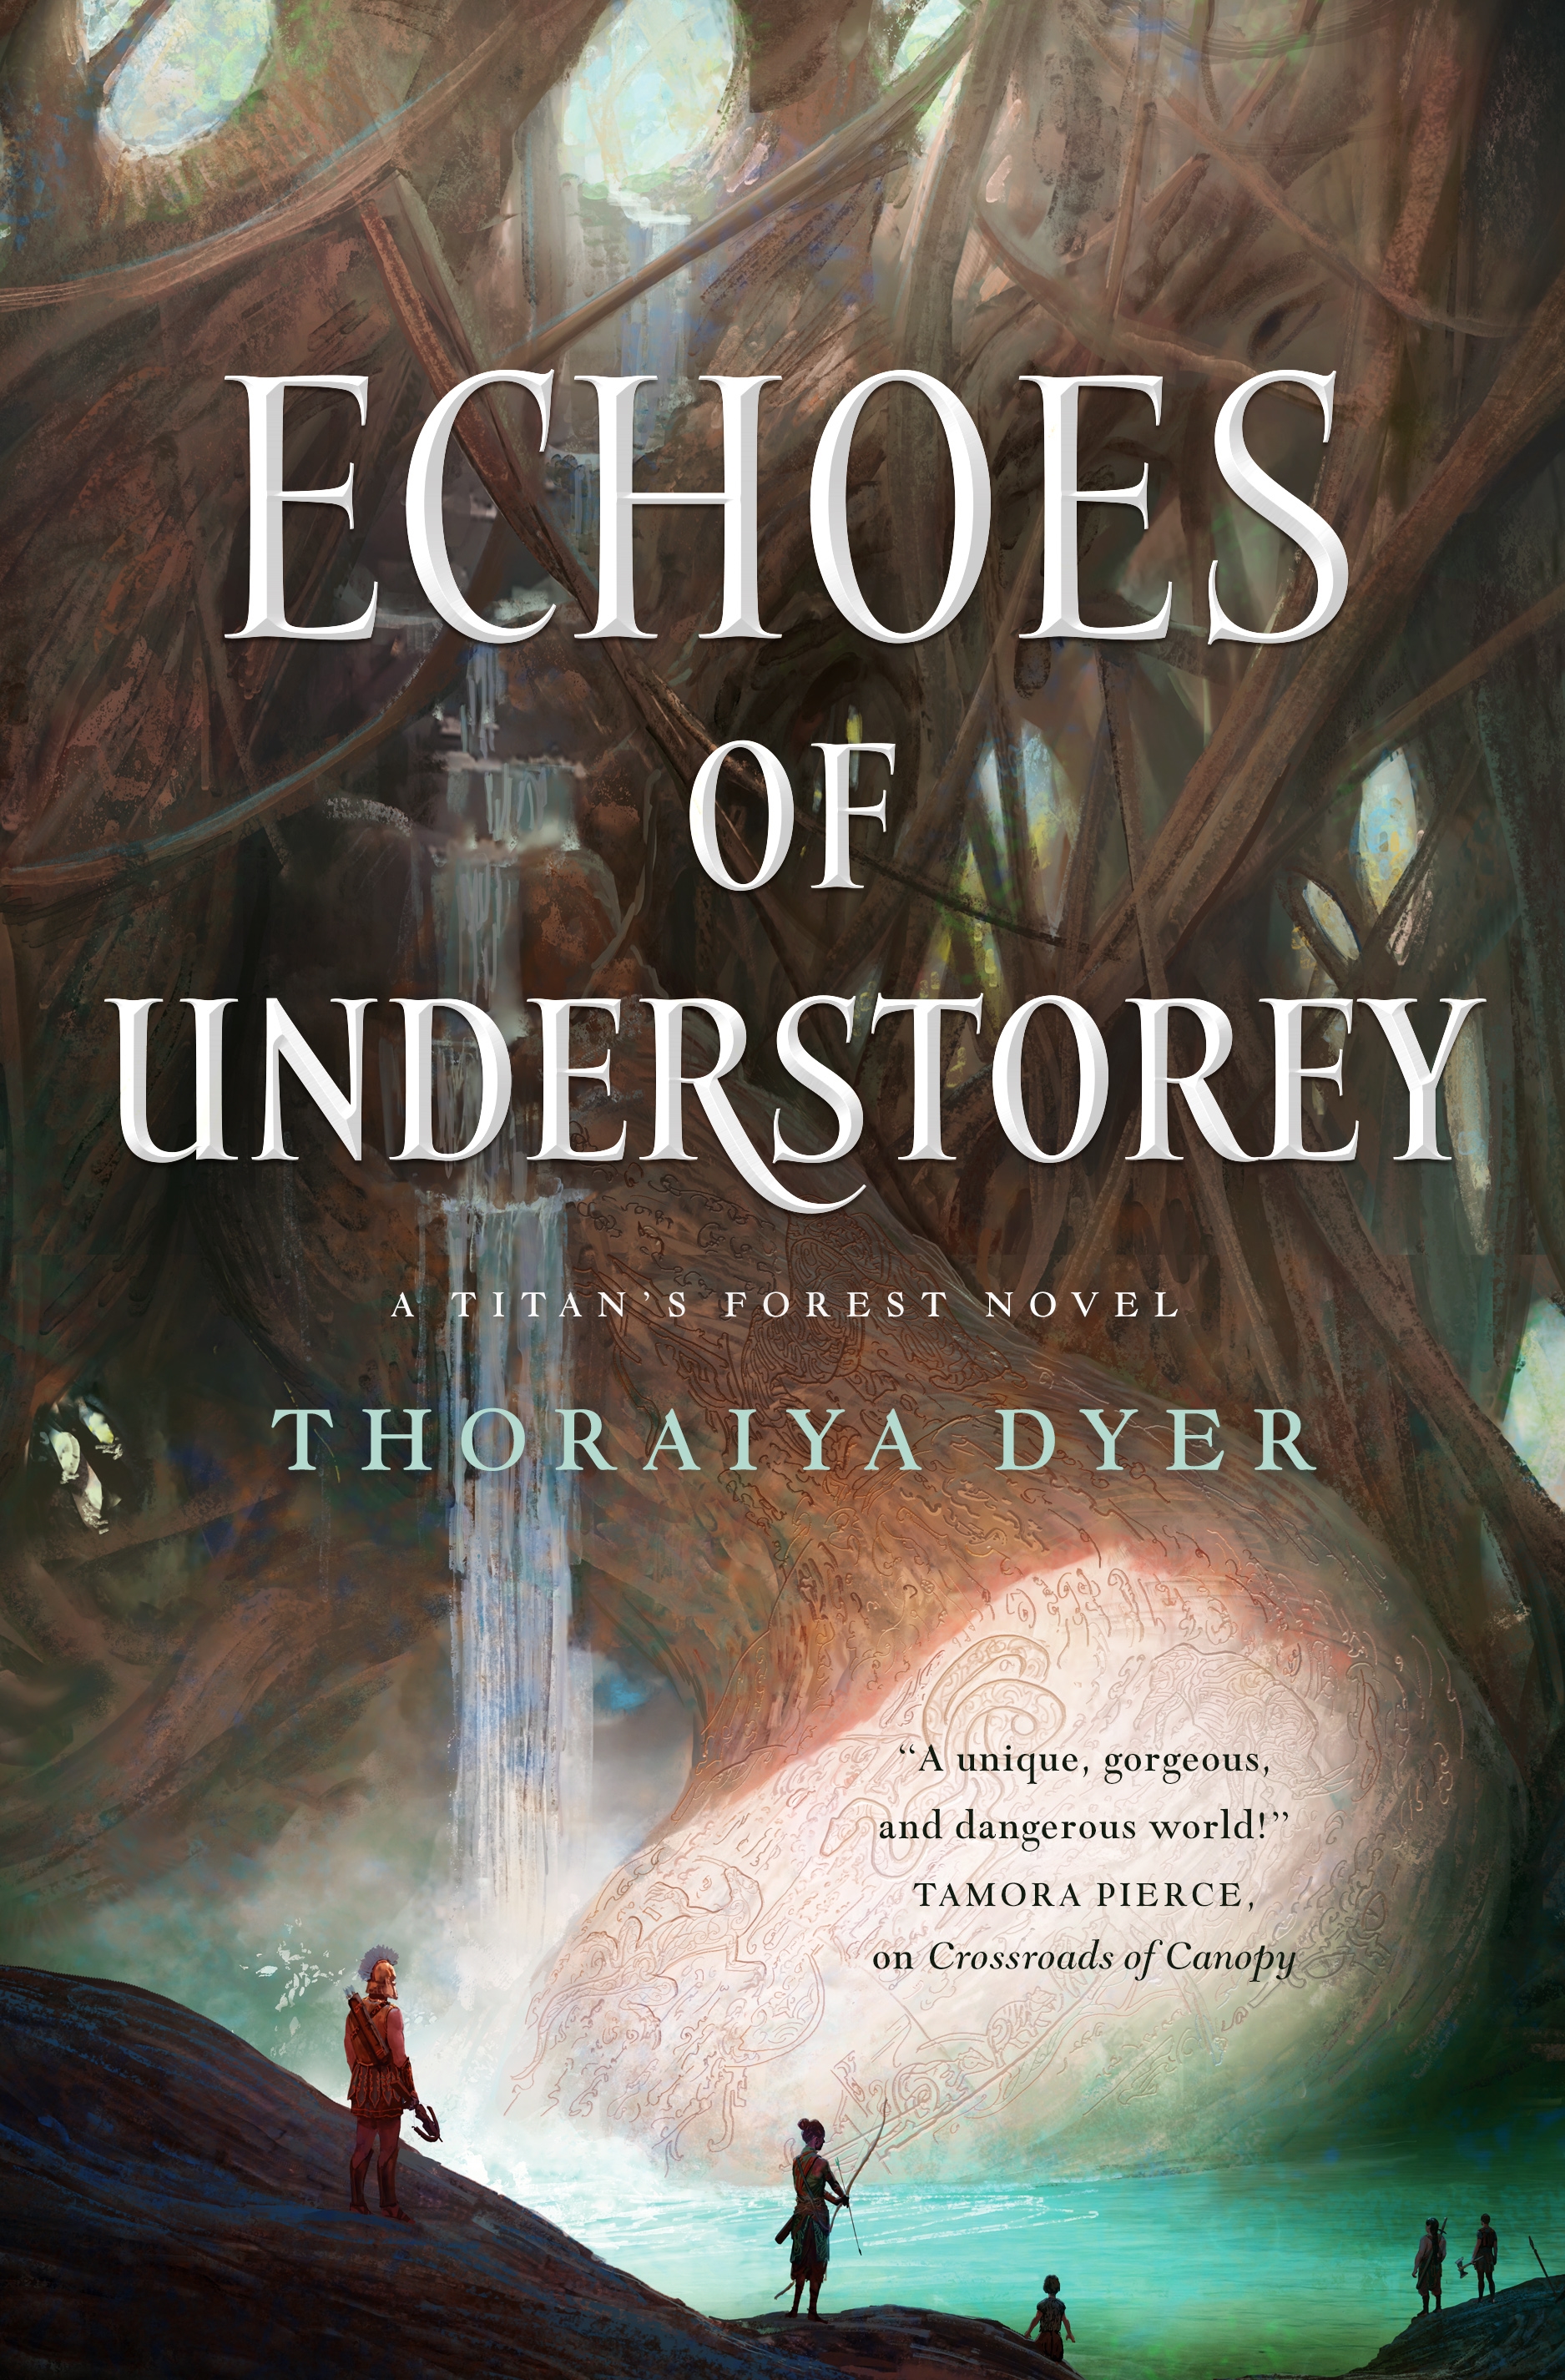 Echoes of Understorey : A Titan's Forest Novel by Thoraiya Dyer